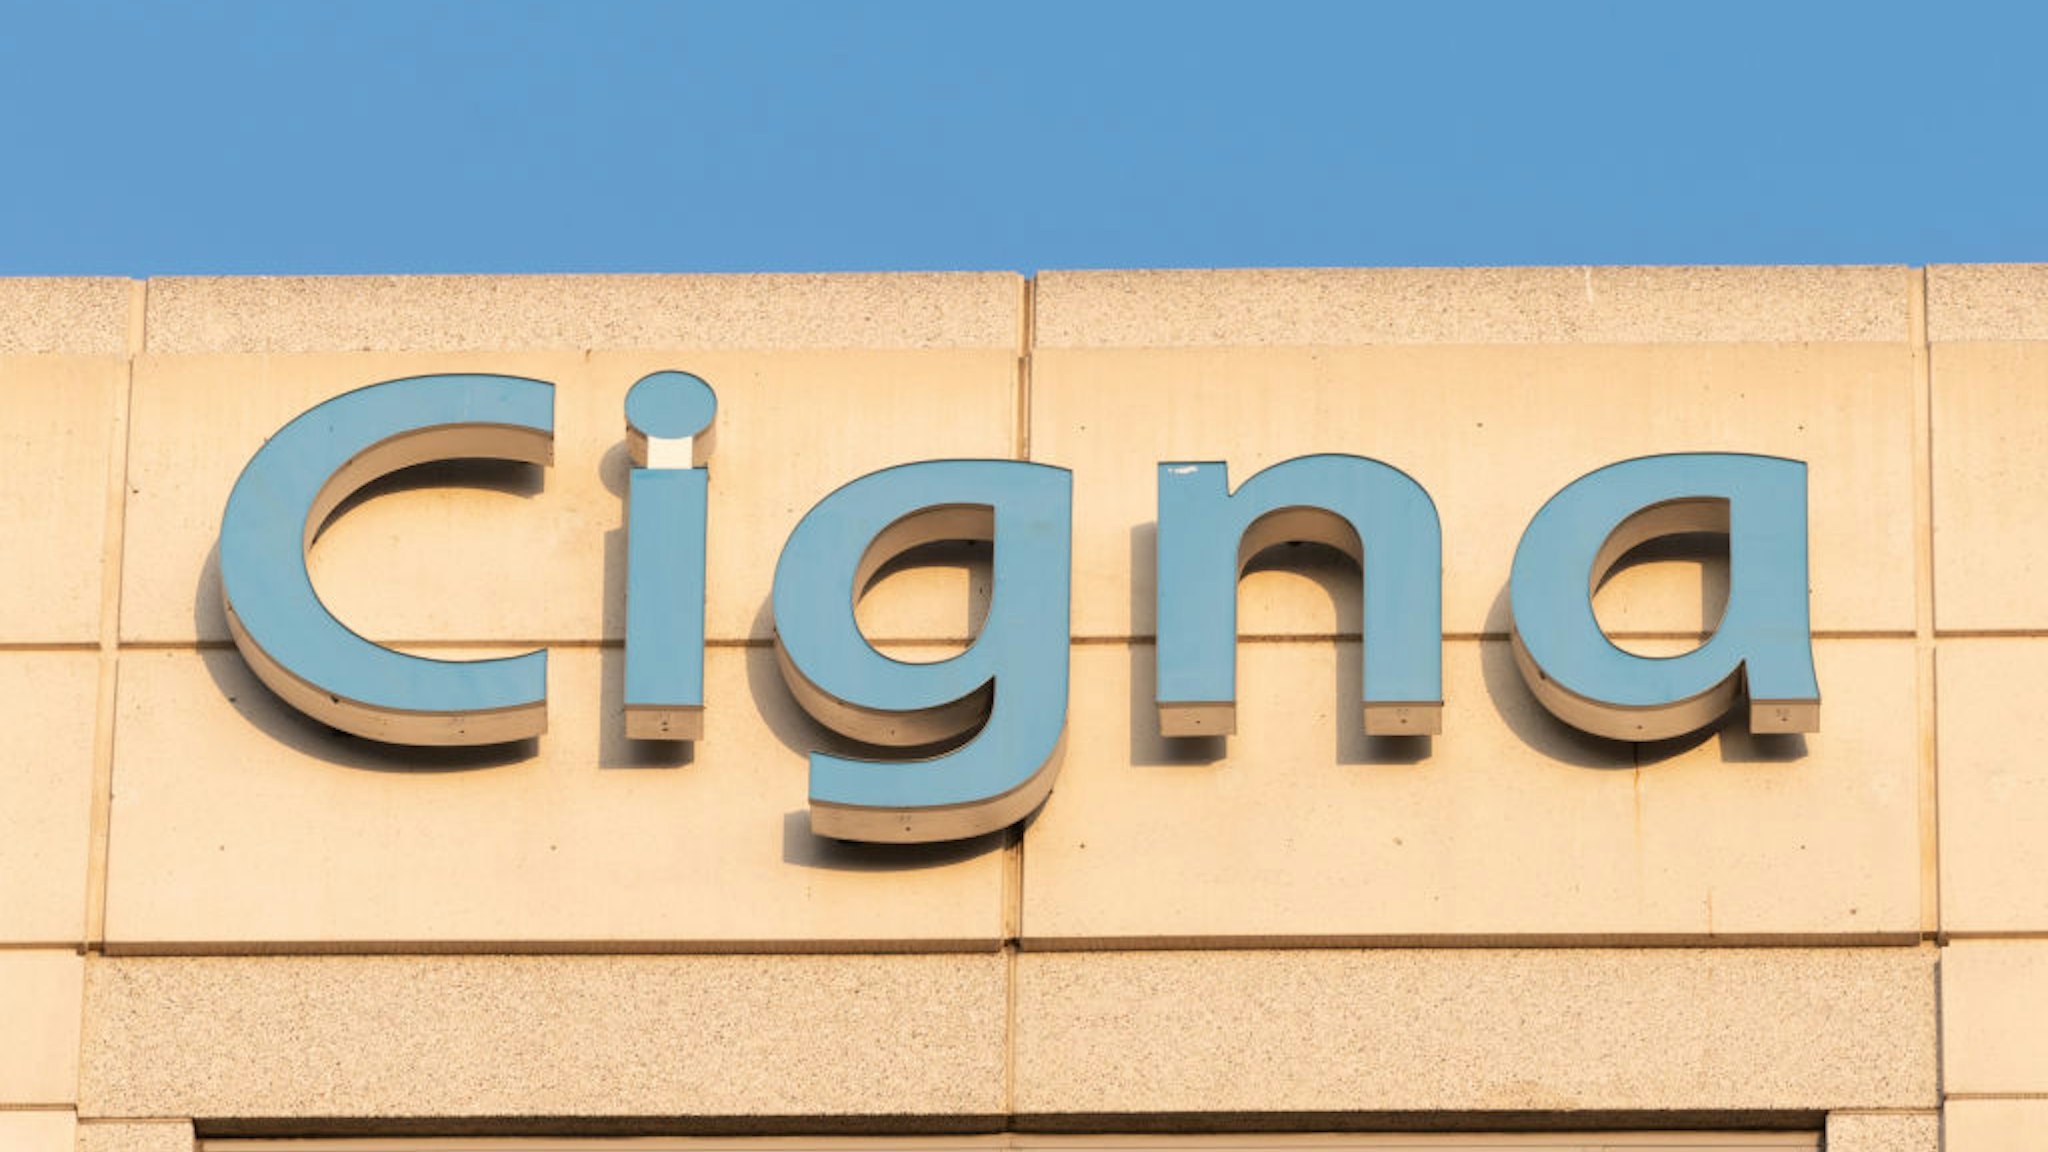 GLENDALE, CA - OCTOBER 22: General views of the Cigna health care corporate offices on October 22, 2020 in Glendale, California.